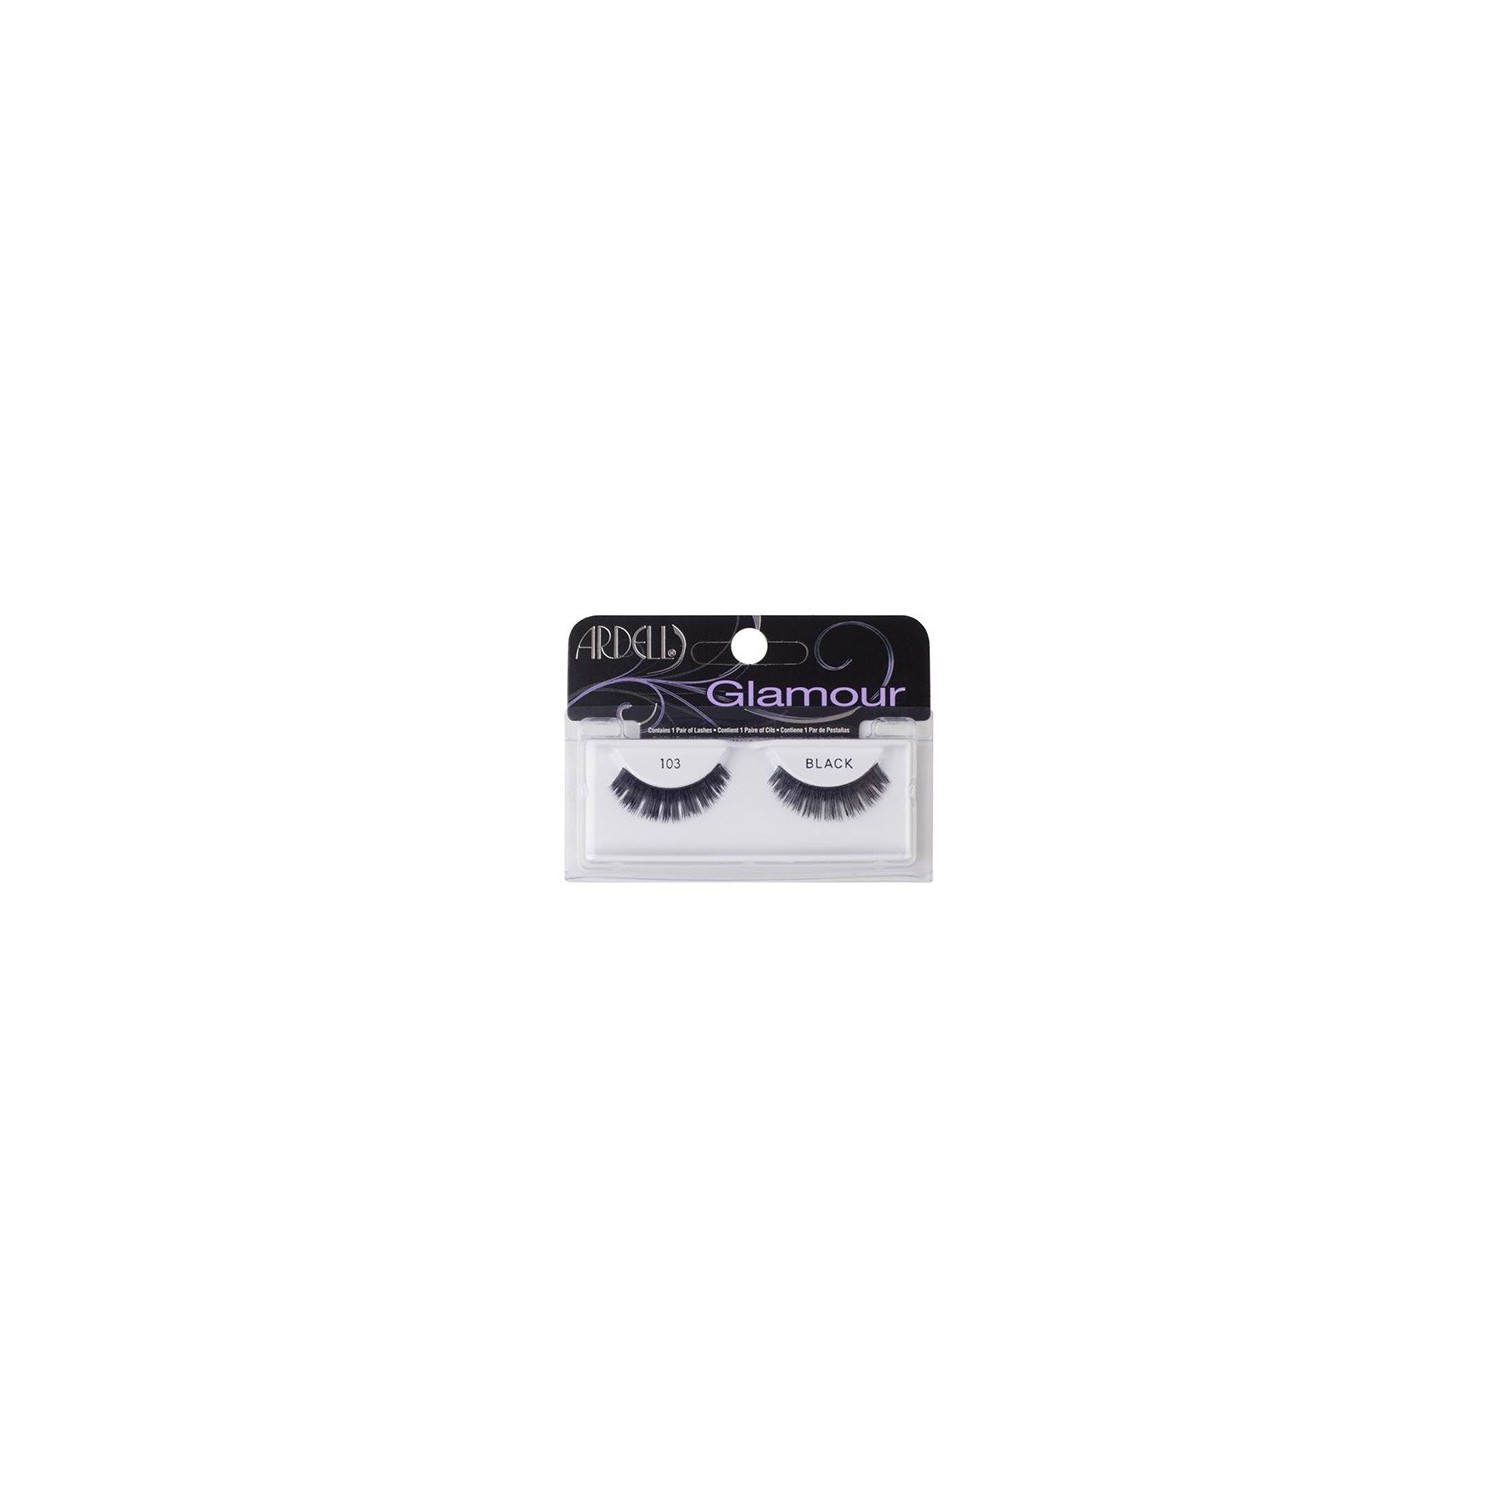 Ardell Lashes 103 Black (Xp16660310)